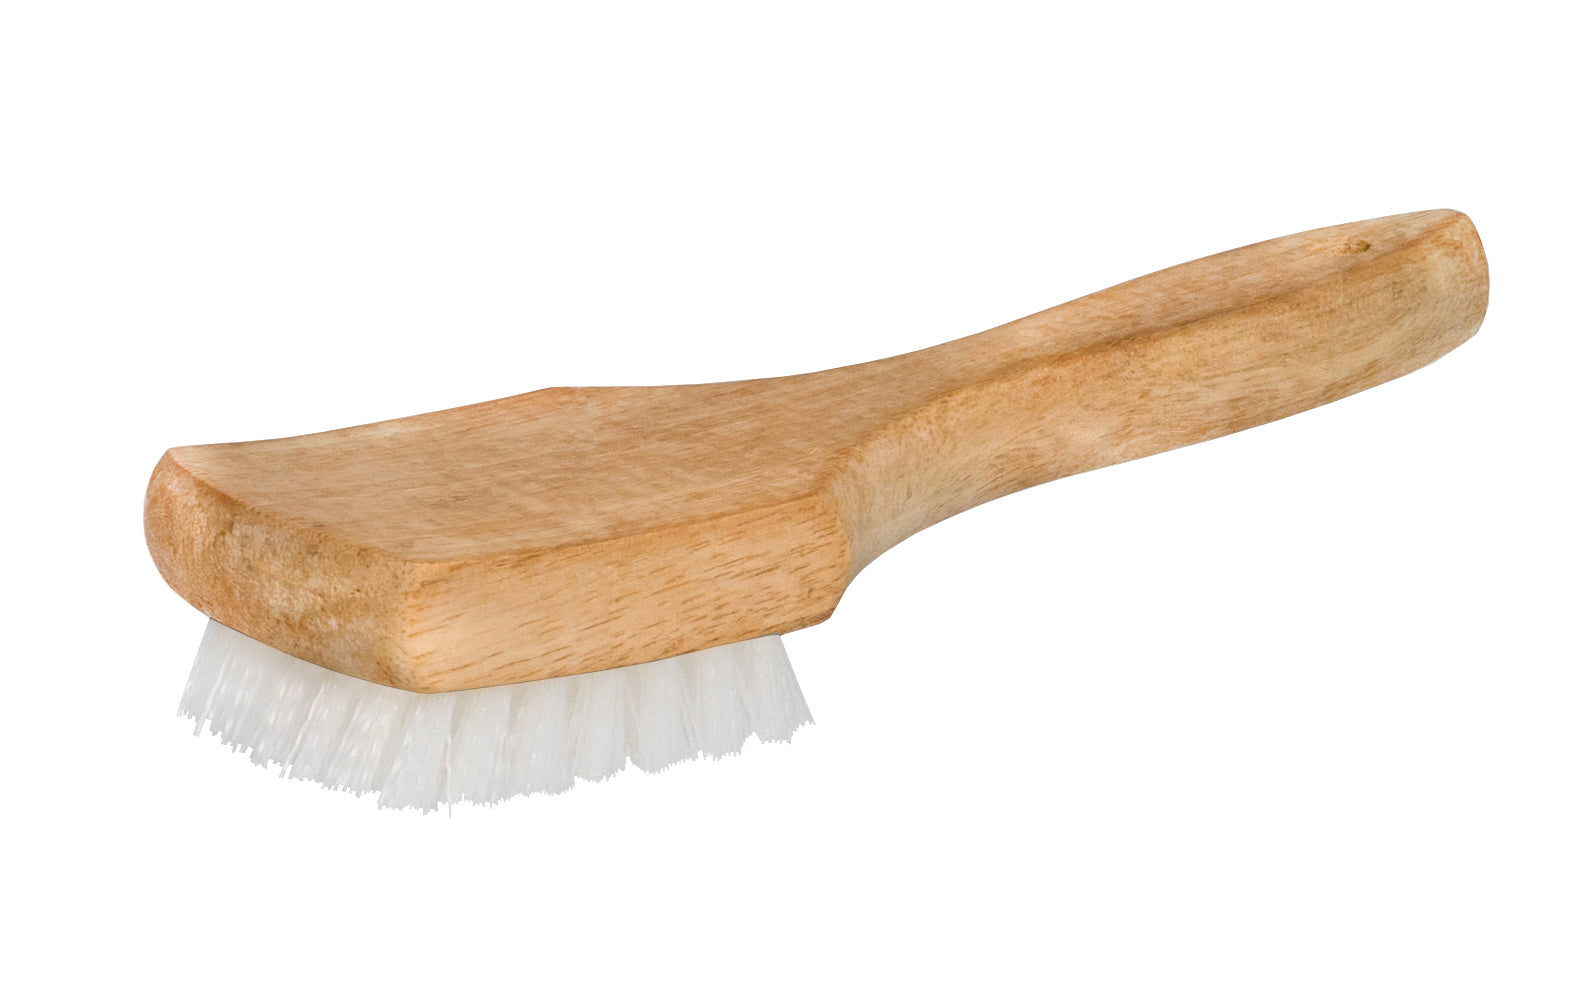 USA-made 8-1/2" long brush made by Magnolia. 3" x 2-1/2" Nylon Bristles are staple set in durable wooden handle. For general cleaning including for use in the shop, refinishing, stripping paint on home furniture, metal plating & finishing industries or for cleaning parts, sidewall tires - Model No. 6-N - Sidewall Brush